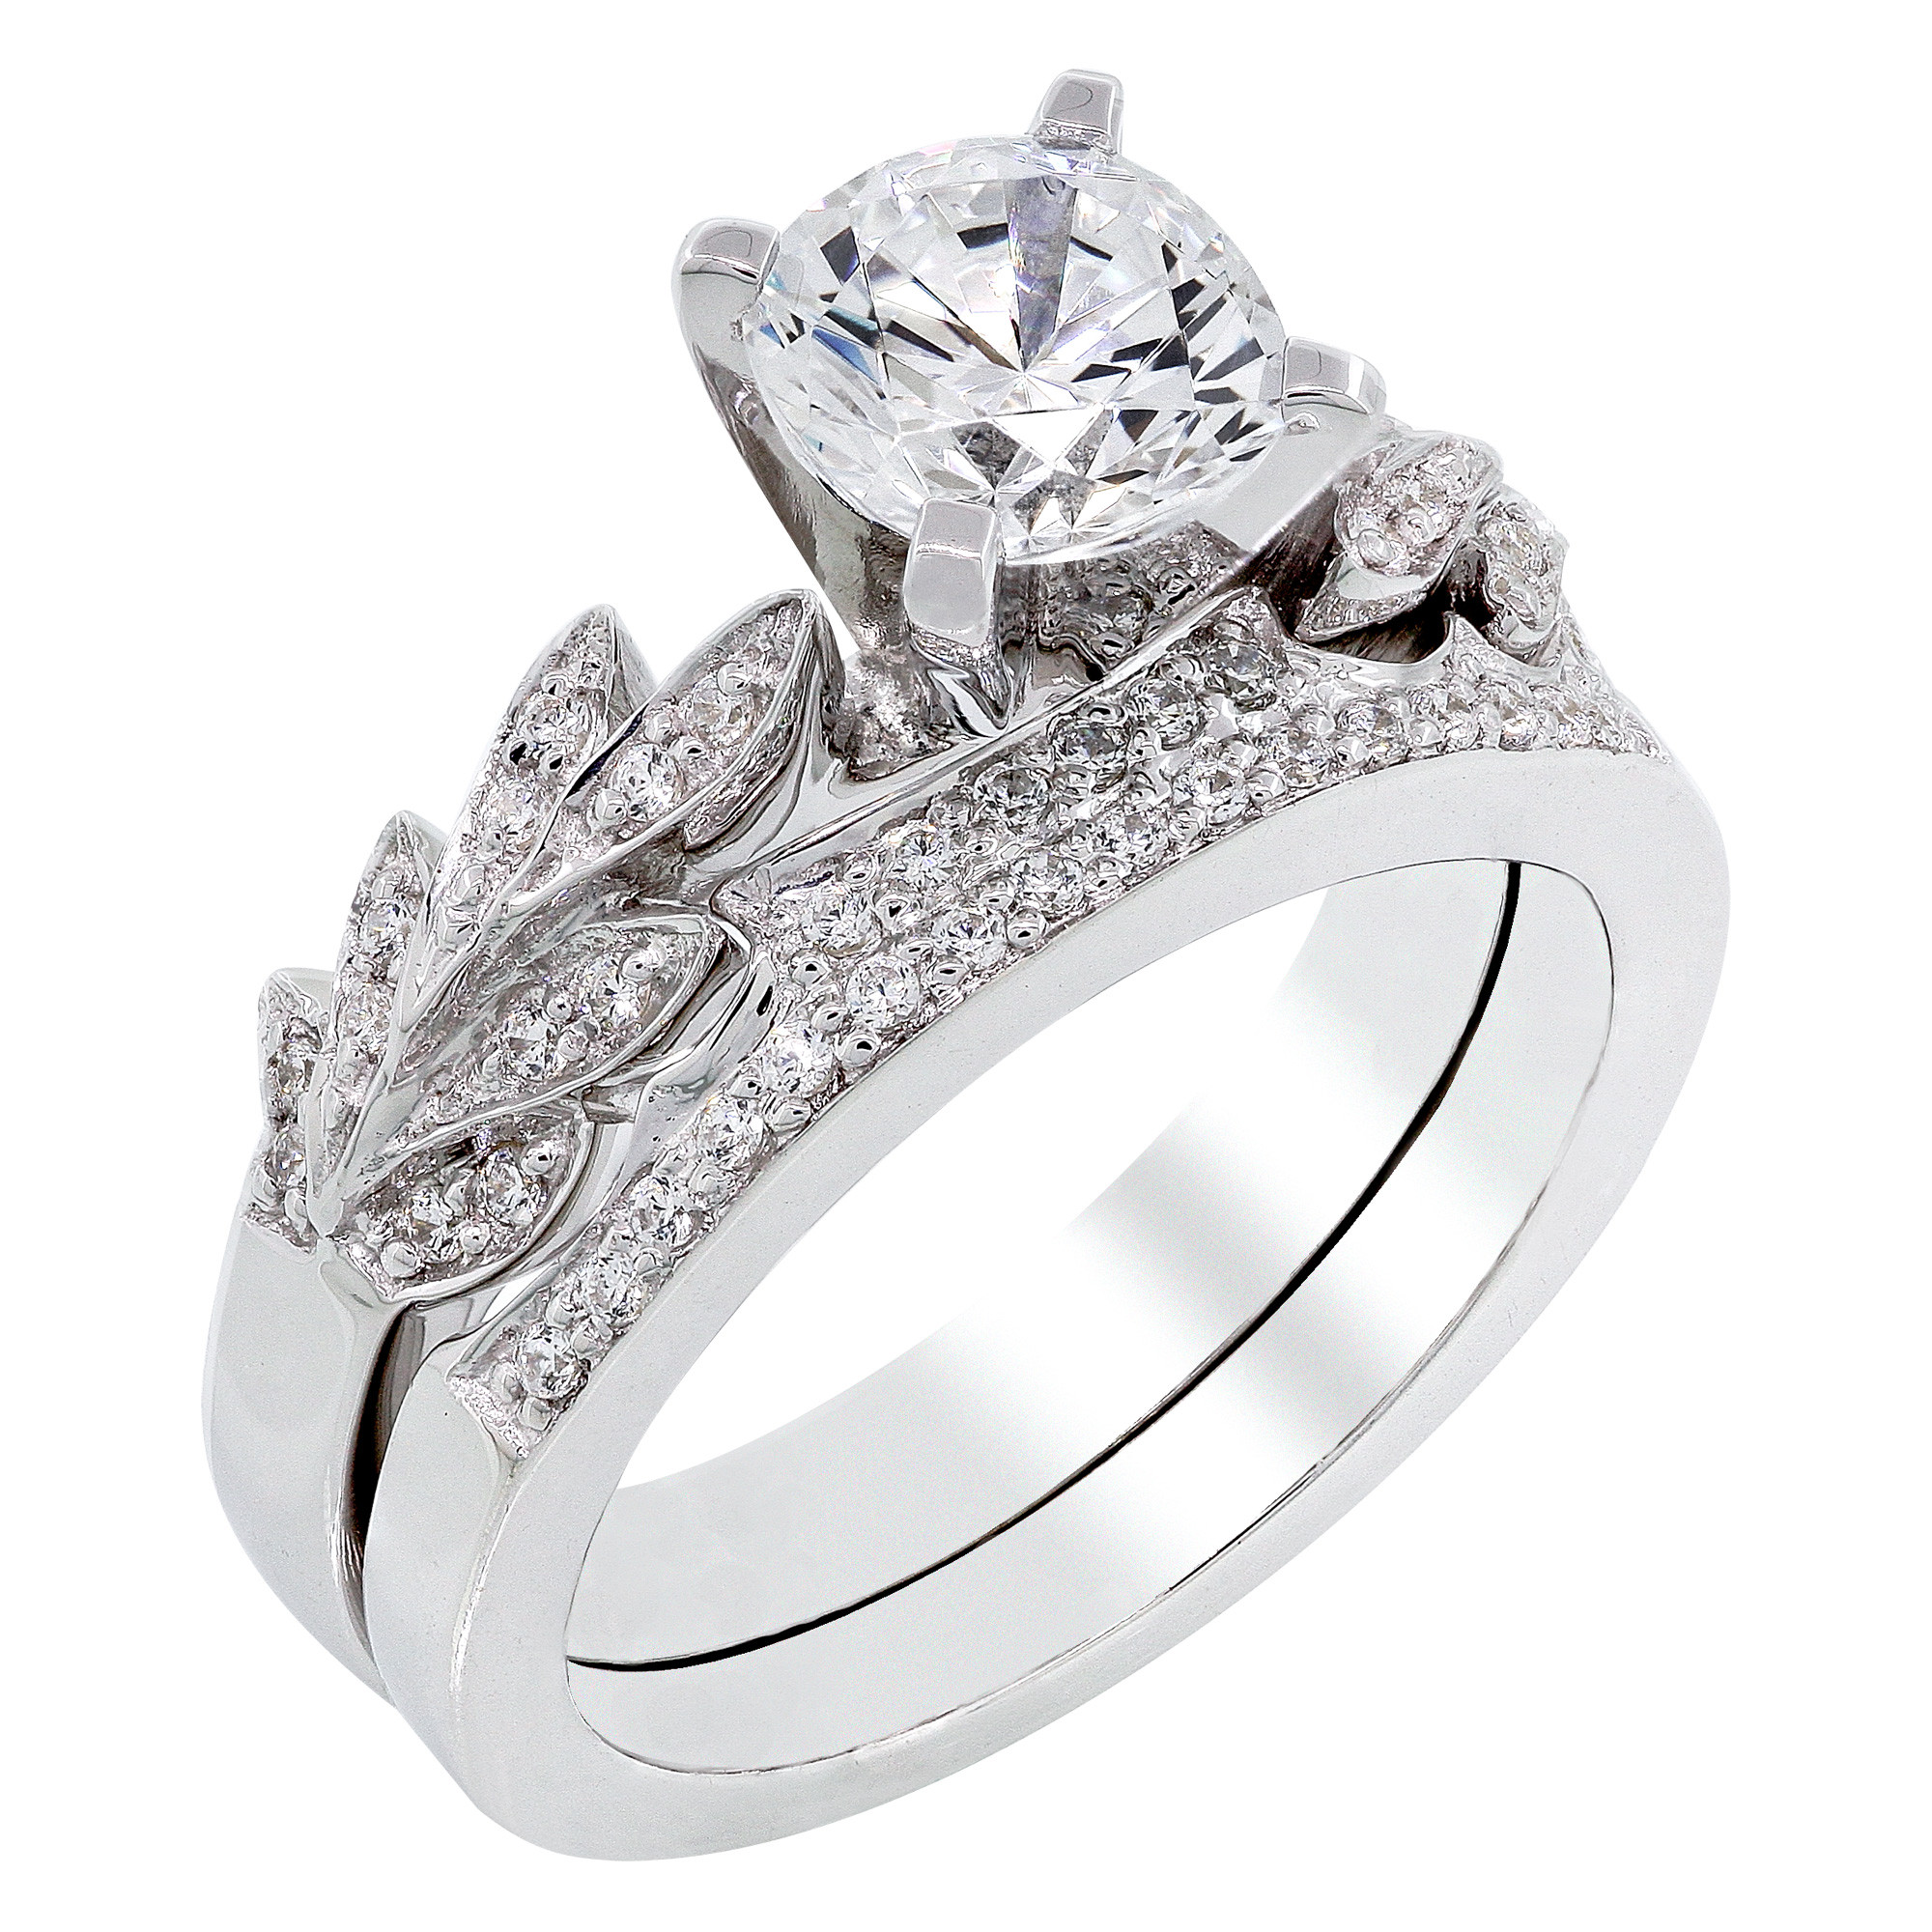 Diamond Bridal Rings
 Diamond Nexus Introduces New Engagement Ring Collection